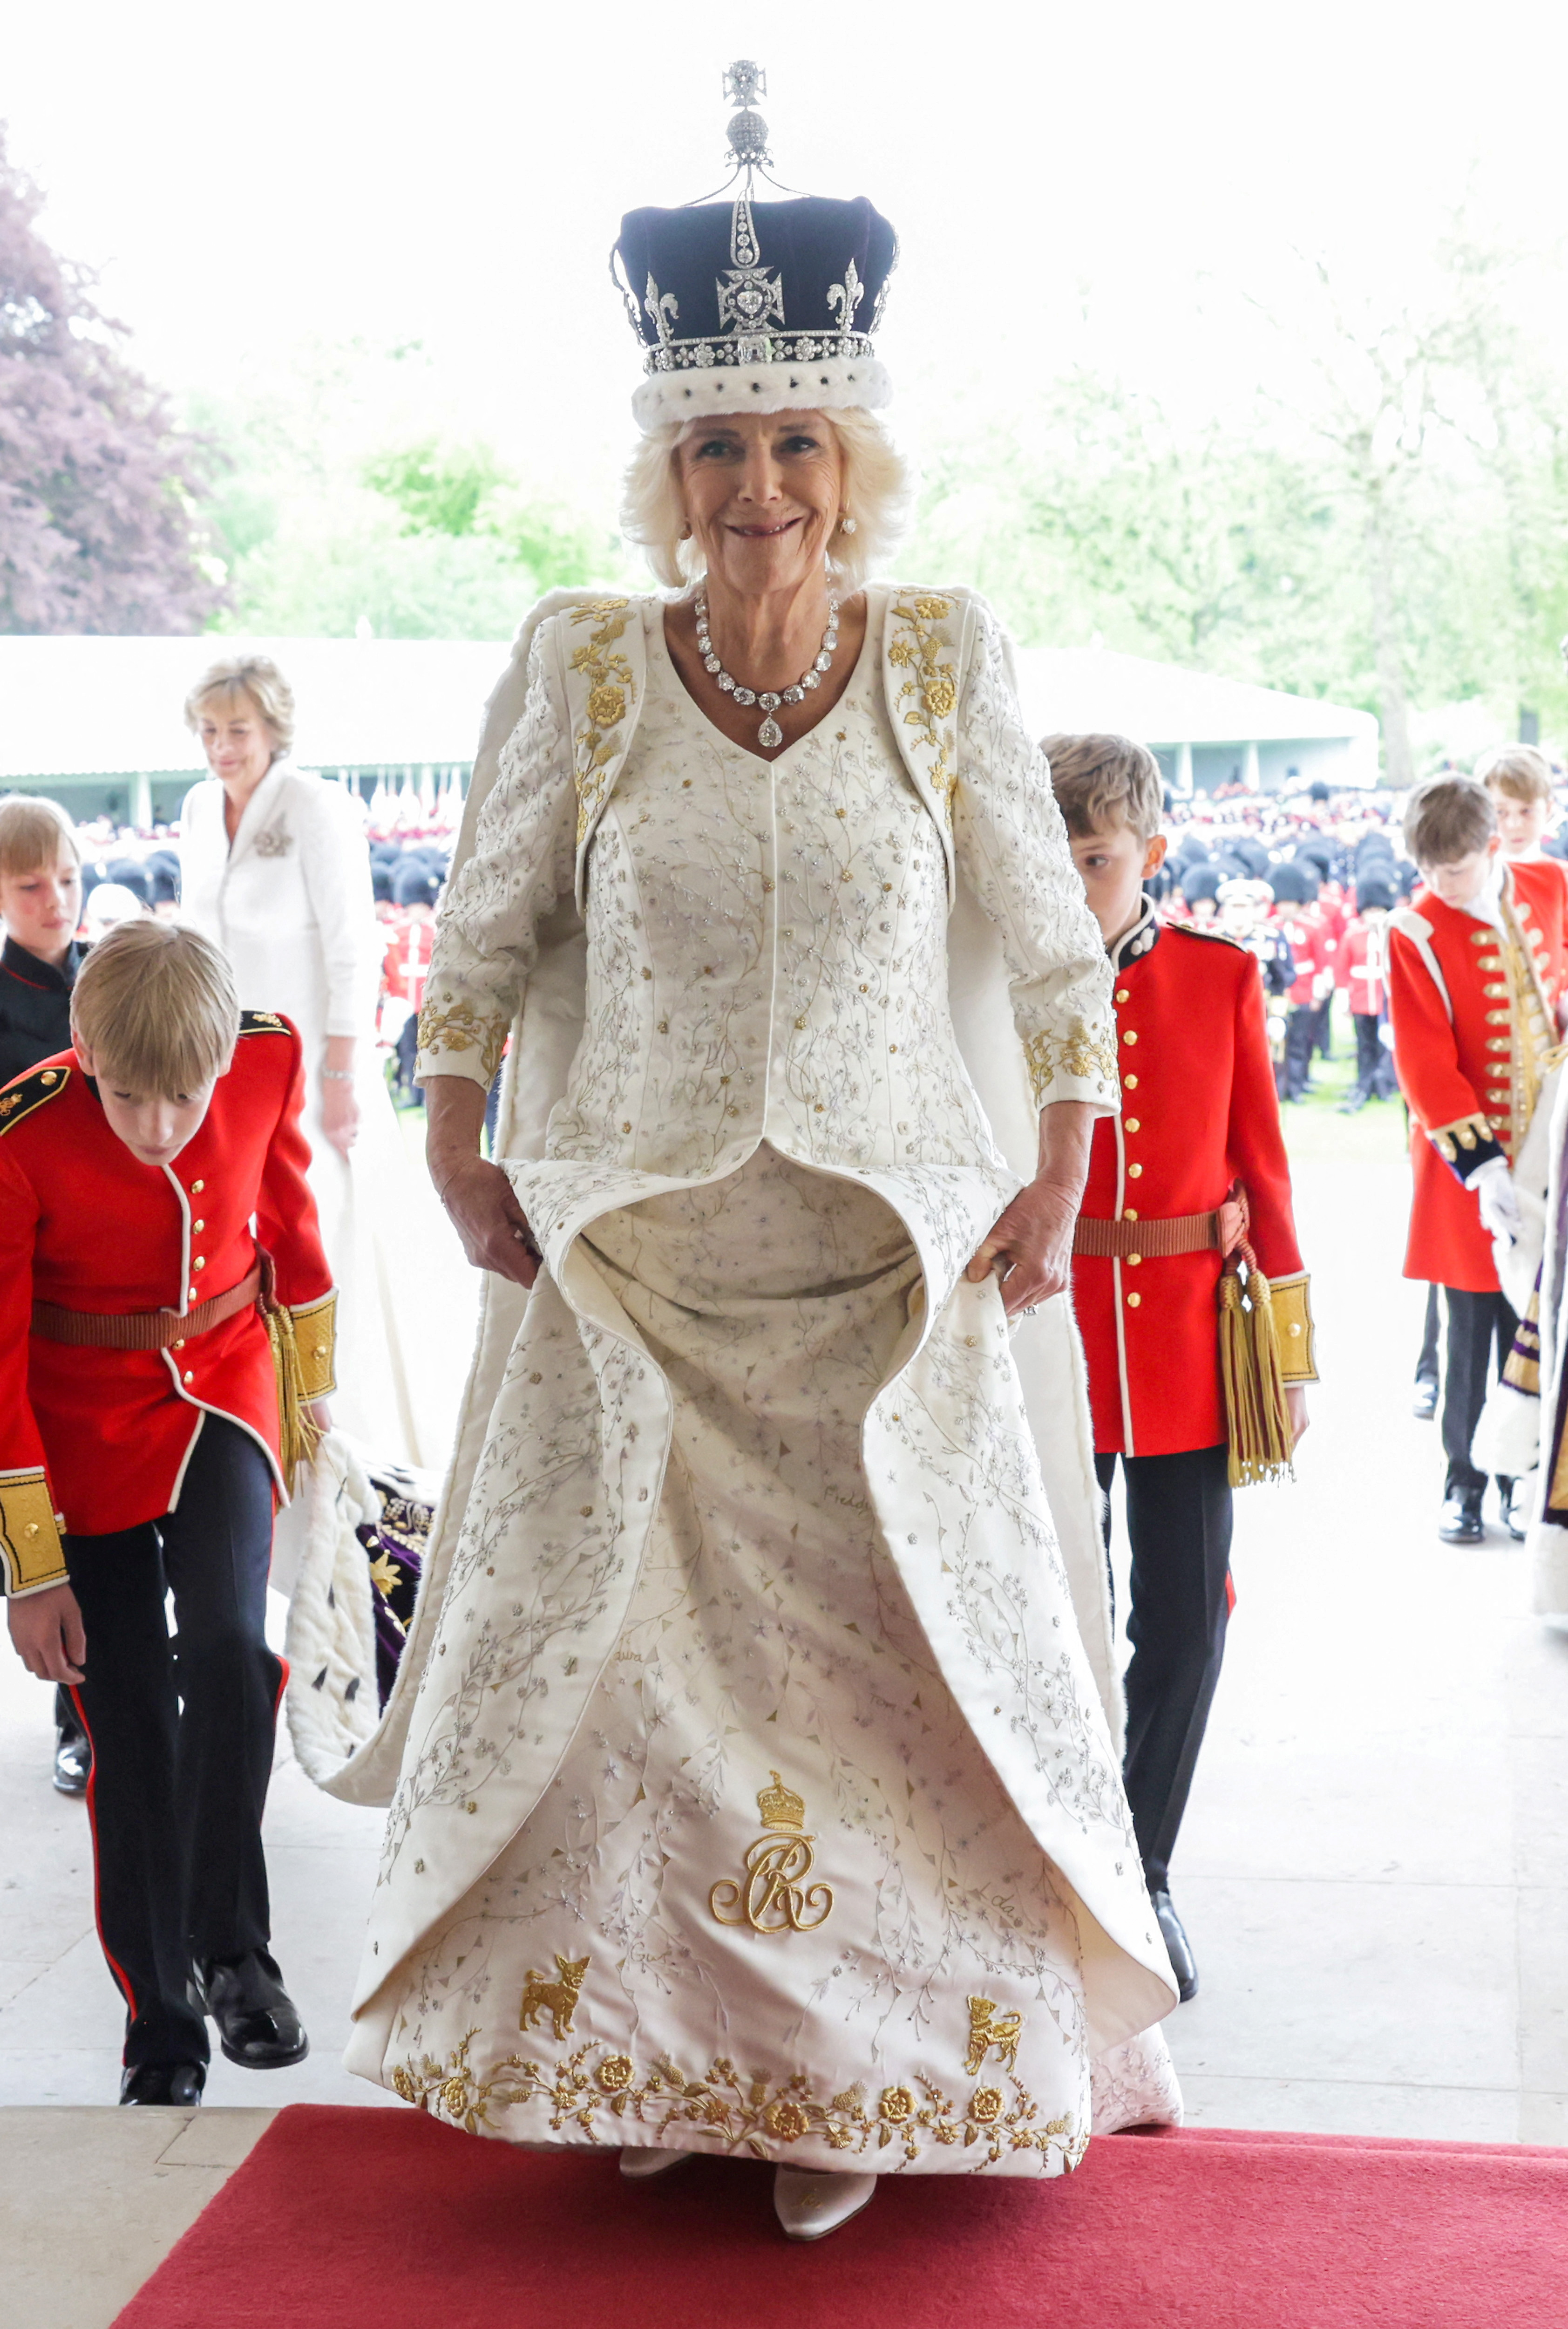 In This handout image released by Buckingham Palace, Queen Camilla smiles after her Coronation with King Charles III, at Buckingham Palace on May 06, 2023 in London, England.  Chris Jackson/Buckingham Palace/Handout via REUTERS ATTENTION EDITORS - THIS IMAGE HAS BEEN SUPPLIED BY A THIRD PARTY.  MANDATORY CREDIT.  DO NOT RESOLVE.  DO NOT ARCHIVE.  NEWS EDITORIAL USE ONLY.  IMAGES MAY ONLY BE USED IN RELATION TO THE CORONATION OF KING CHARLES III.  NO COMMERCIAL USE.  THE IMAGE SHALL NOT BE USED AFTER 0001hrs, MONDAY 22nd MAY.  DON'T GO OUT  The image must not be digitally enhanced, manipulated or modified in any manner or form.